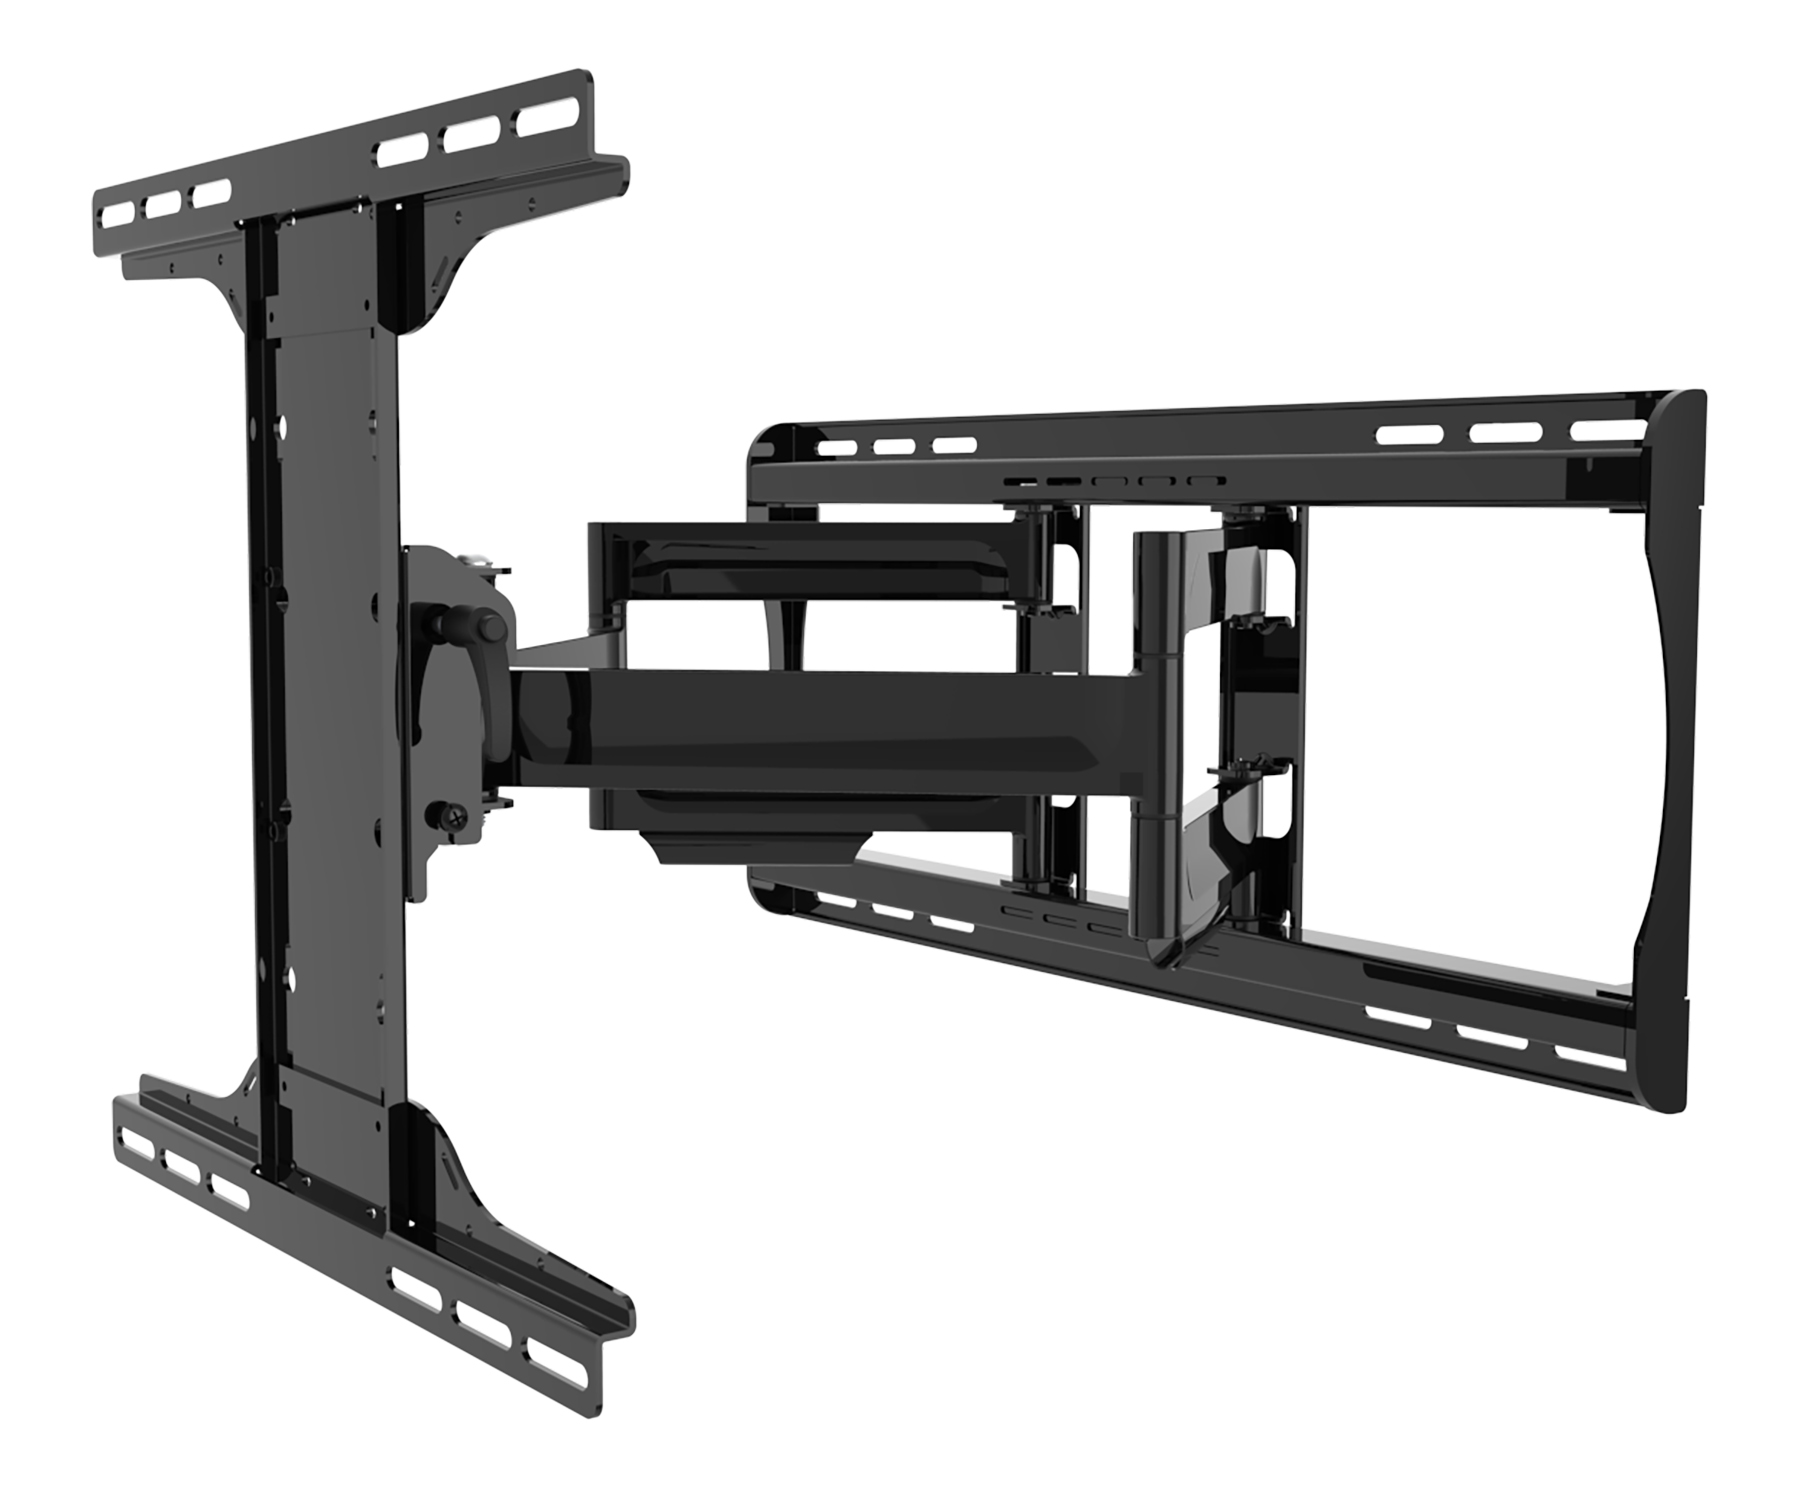 PA762-UNMH Hospitality Articulating Wall Mount